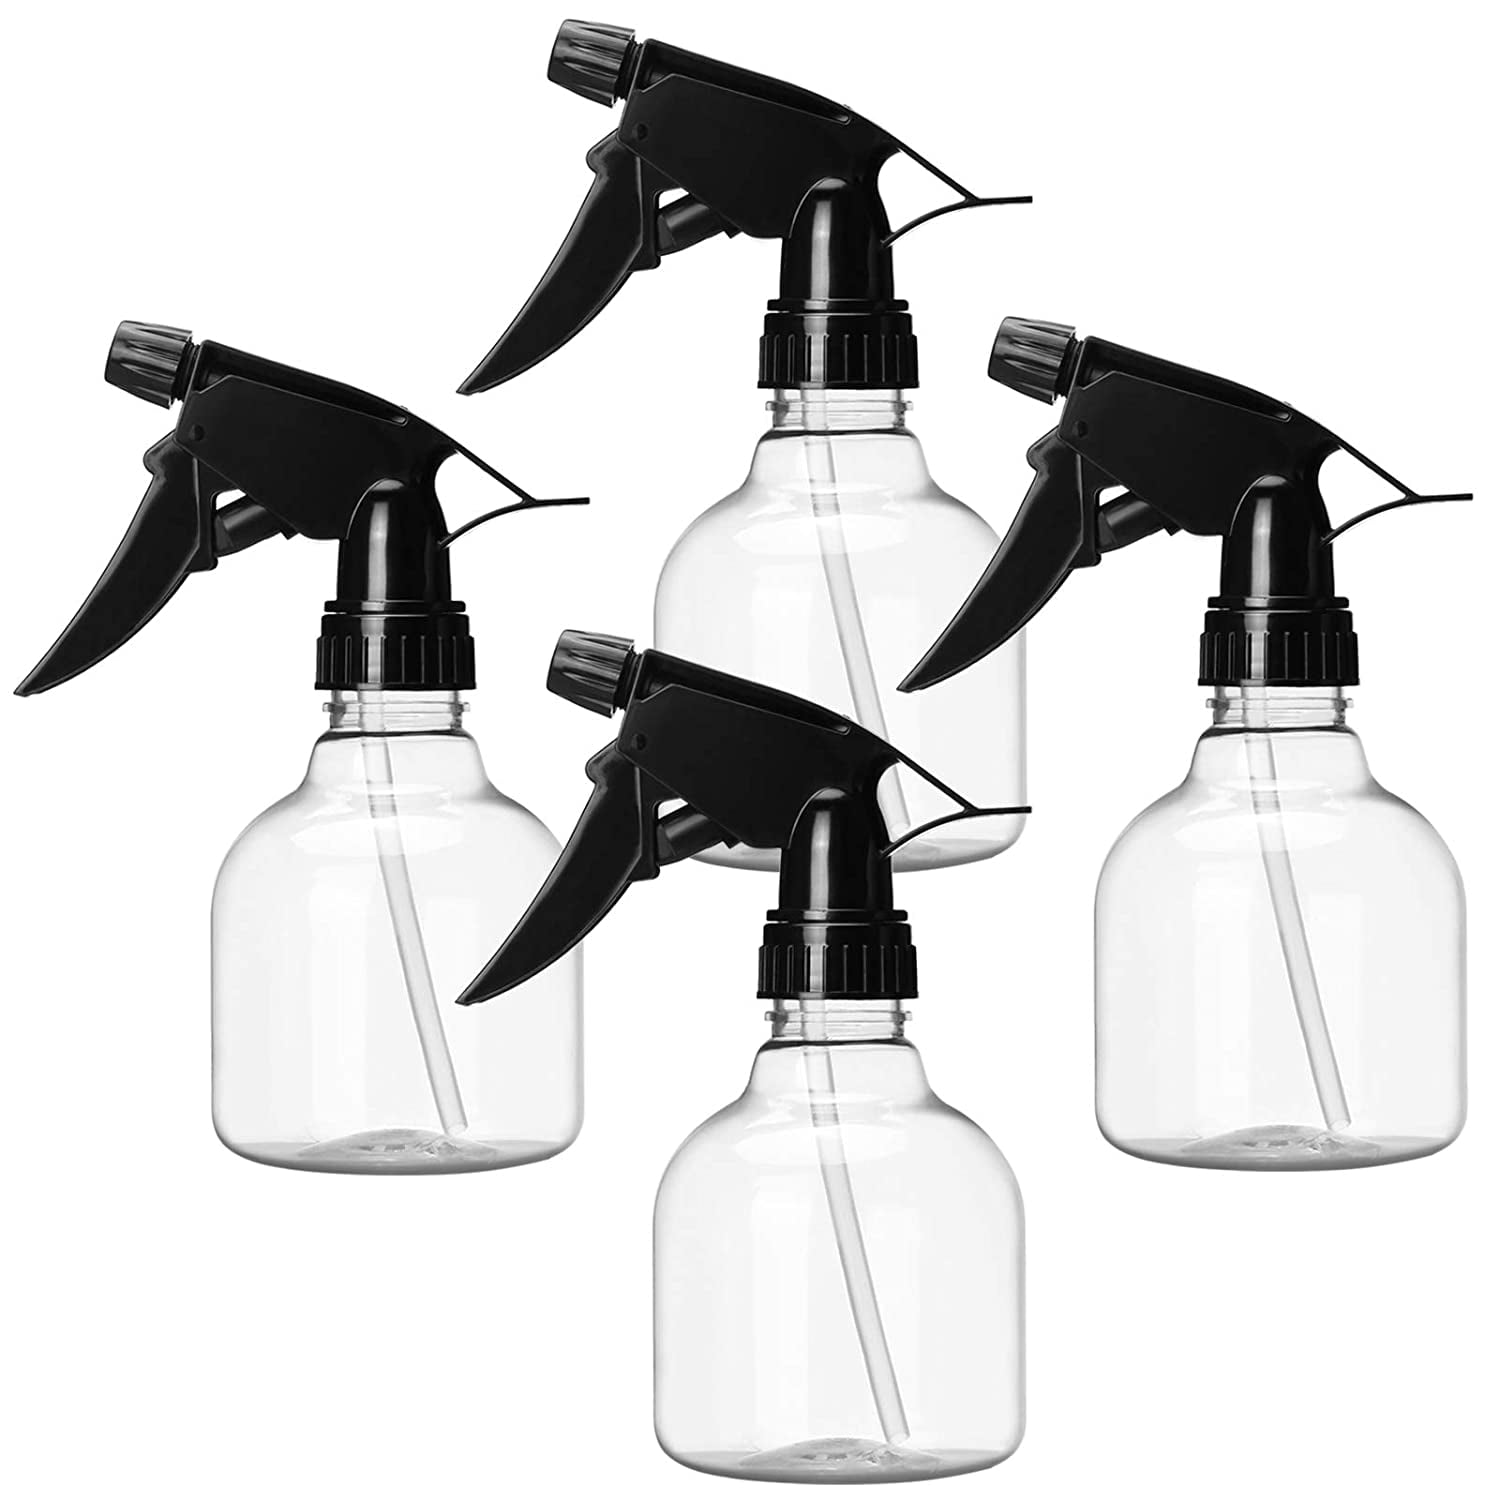 Cooking for Cleaning Solutions Plastic Spray Bottles 4pcs 8oz Empty Clear Spray Bottle with Black Trigger Sprayers Adjustable Nozzle Planting 